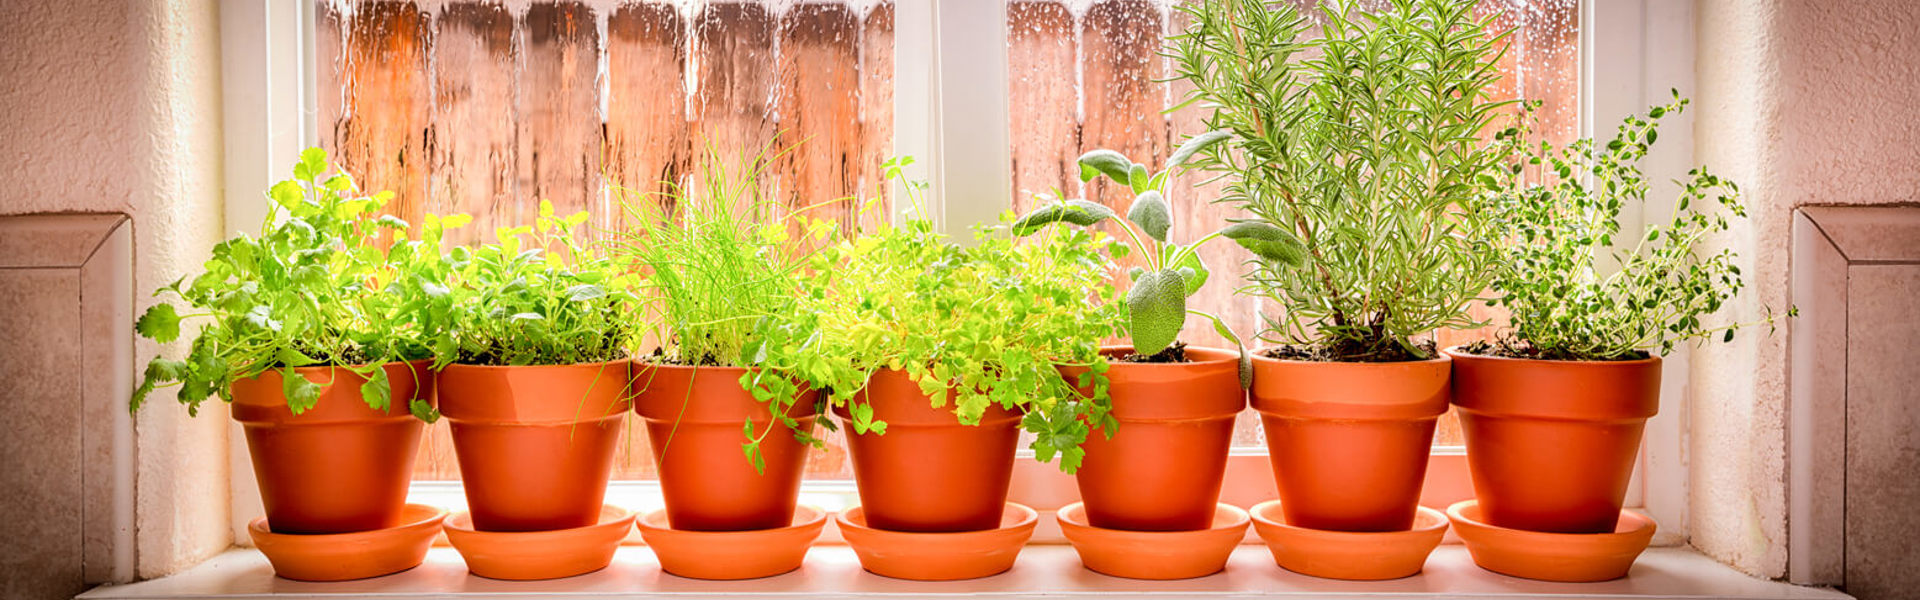 herbs growing in terracotta plant pots lined up on a window sill